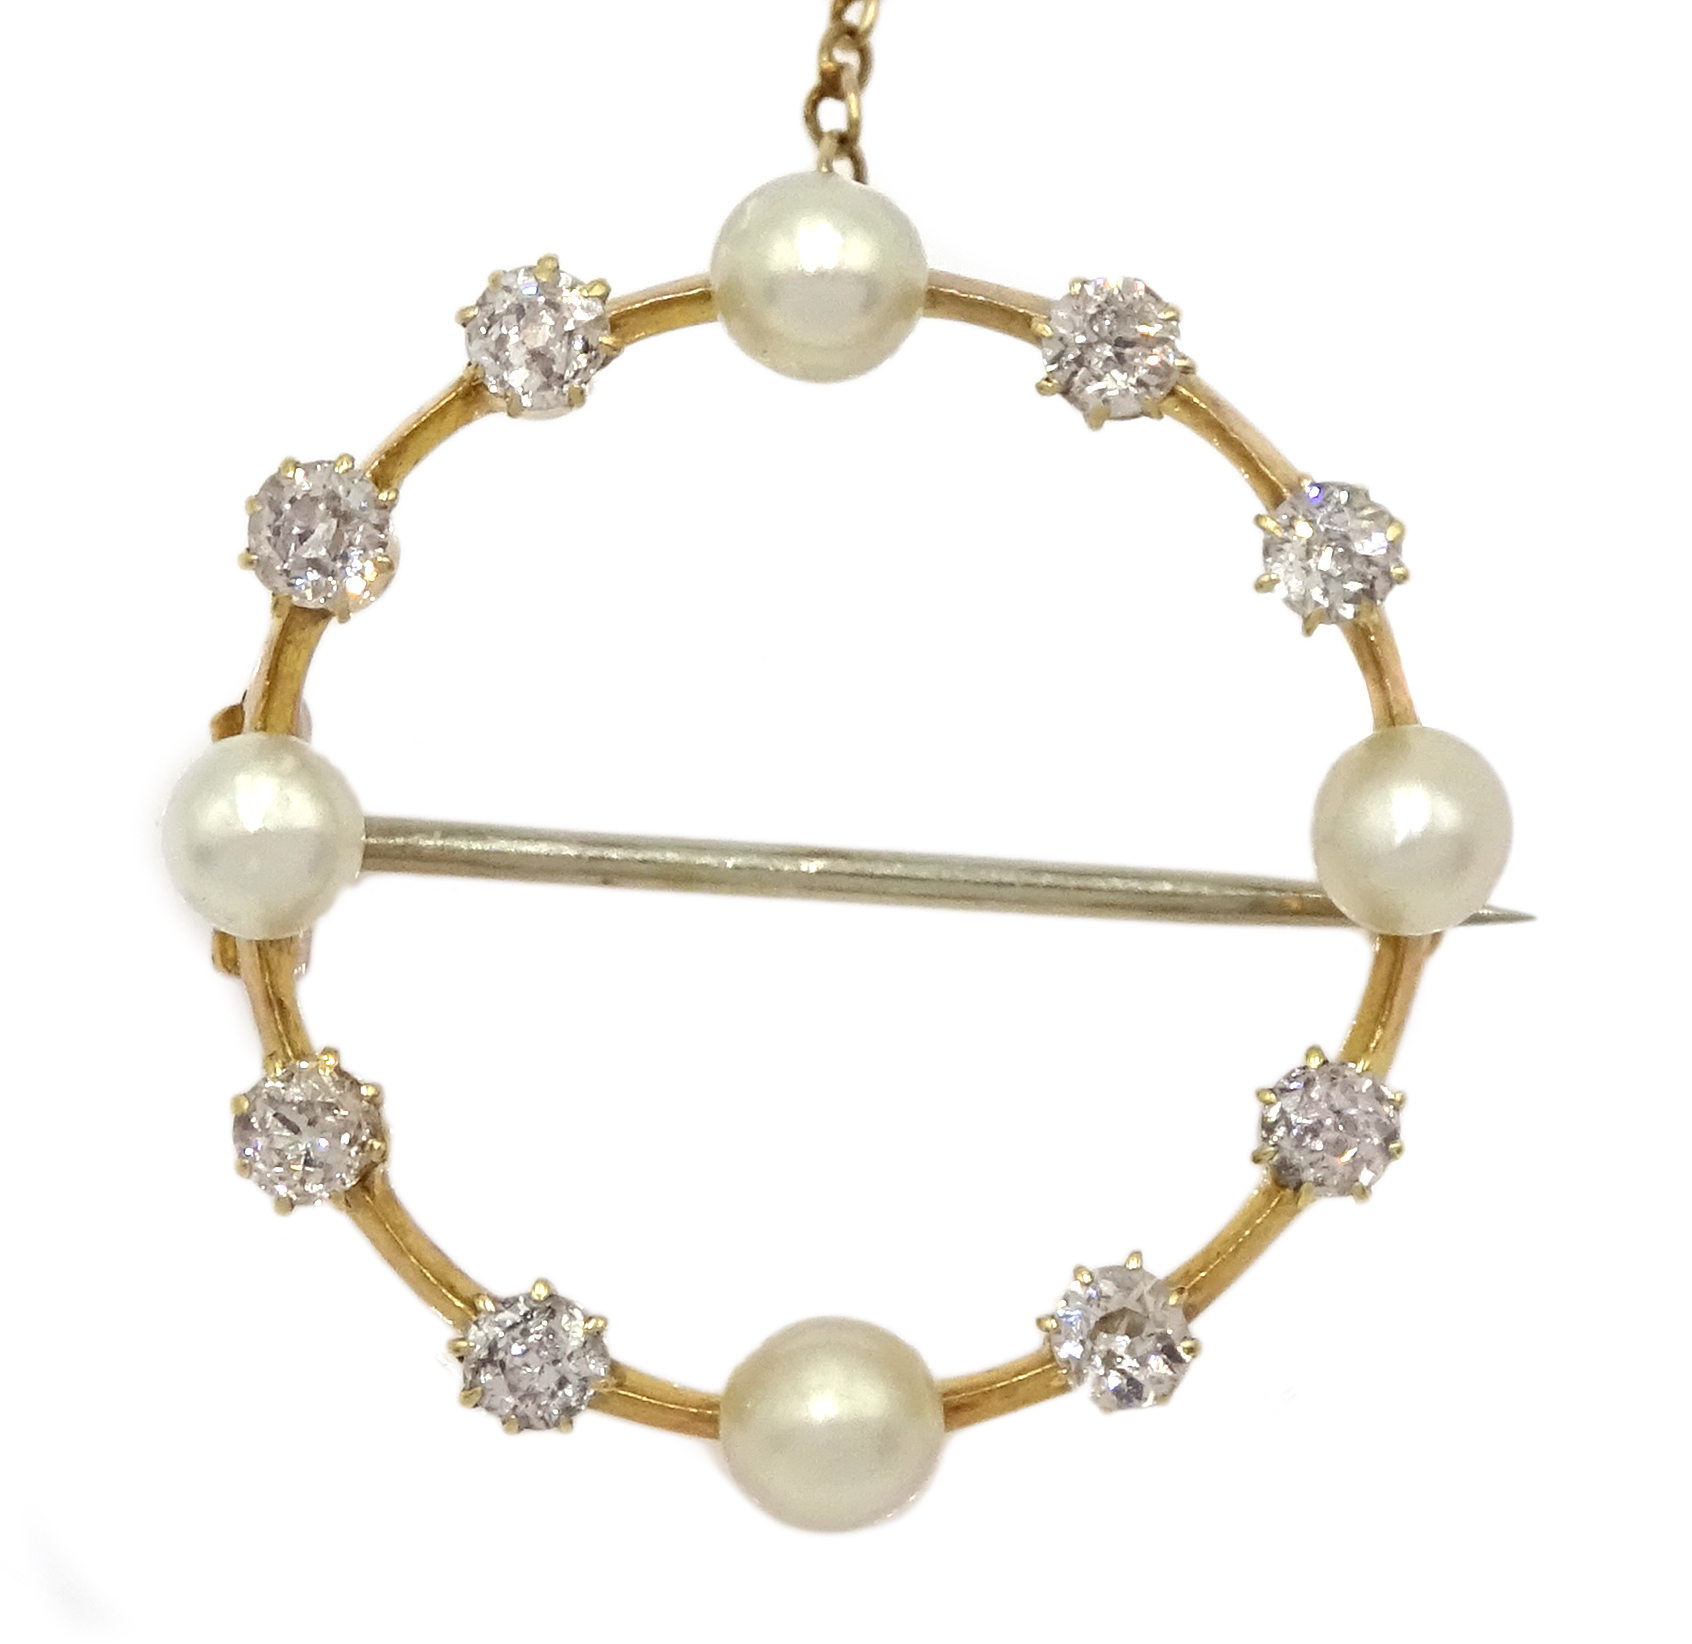 Edwardian gold diamond and pearl circular brooch, stamped 15ct - Image 2 of 3